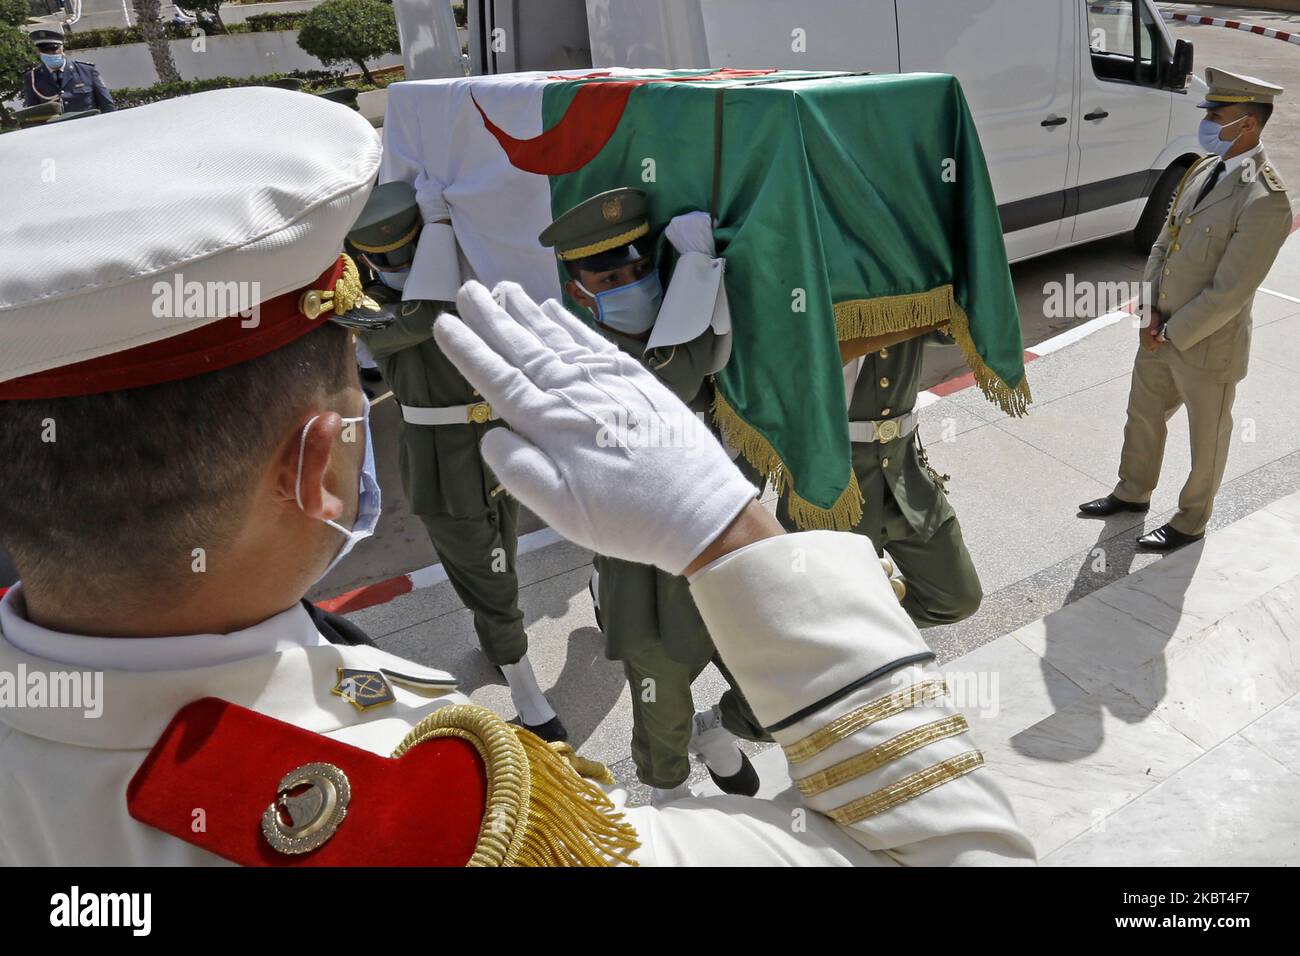 A soldier stands guard next to the national flag-draped coffins containing the remains of 24 Algerian resistance fighters decapitated during the French occupation, at the Moufdi-Zakaria culture palace in Algiers, Algeria, 04 July 2020. France returned the skulls of 24 Algerians who fought against the French colonial occupation of Algeria that began in 1830. The skulls were kept at a museum in Paris since the 19th century while Algeria had been for years demanding repatriation for their burial. (Photo by Billal Bensalem/NurPhoto) Stock Photo